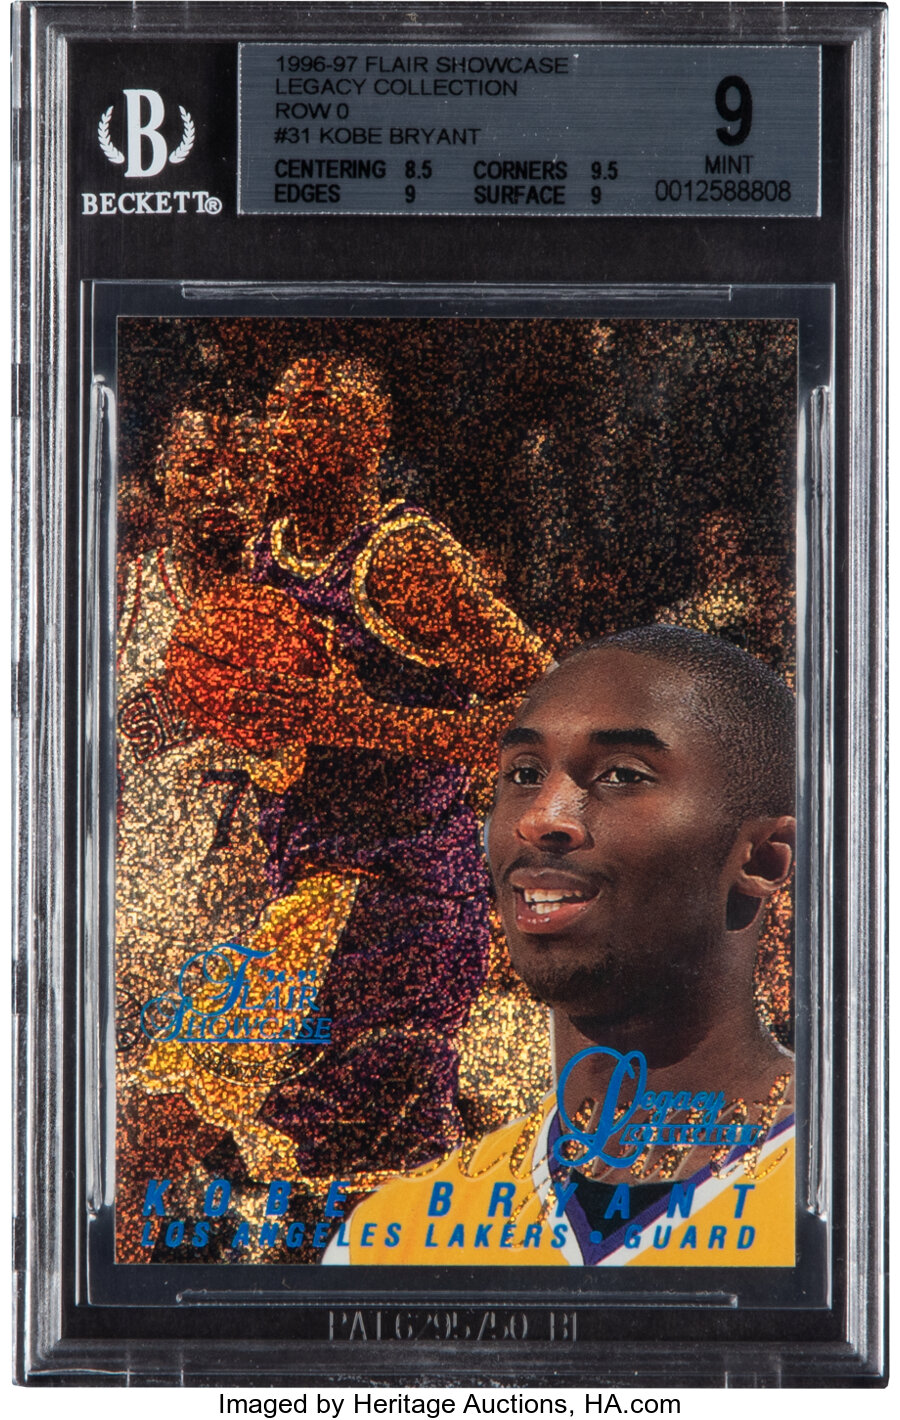 1996 Flair Showcase Legacy Collection Row 0 Kobe Bryant #31 BGS Mint 9 - Serial Numbered 126/150